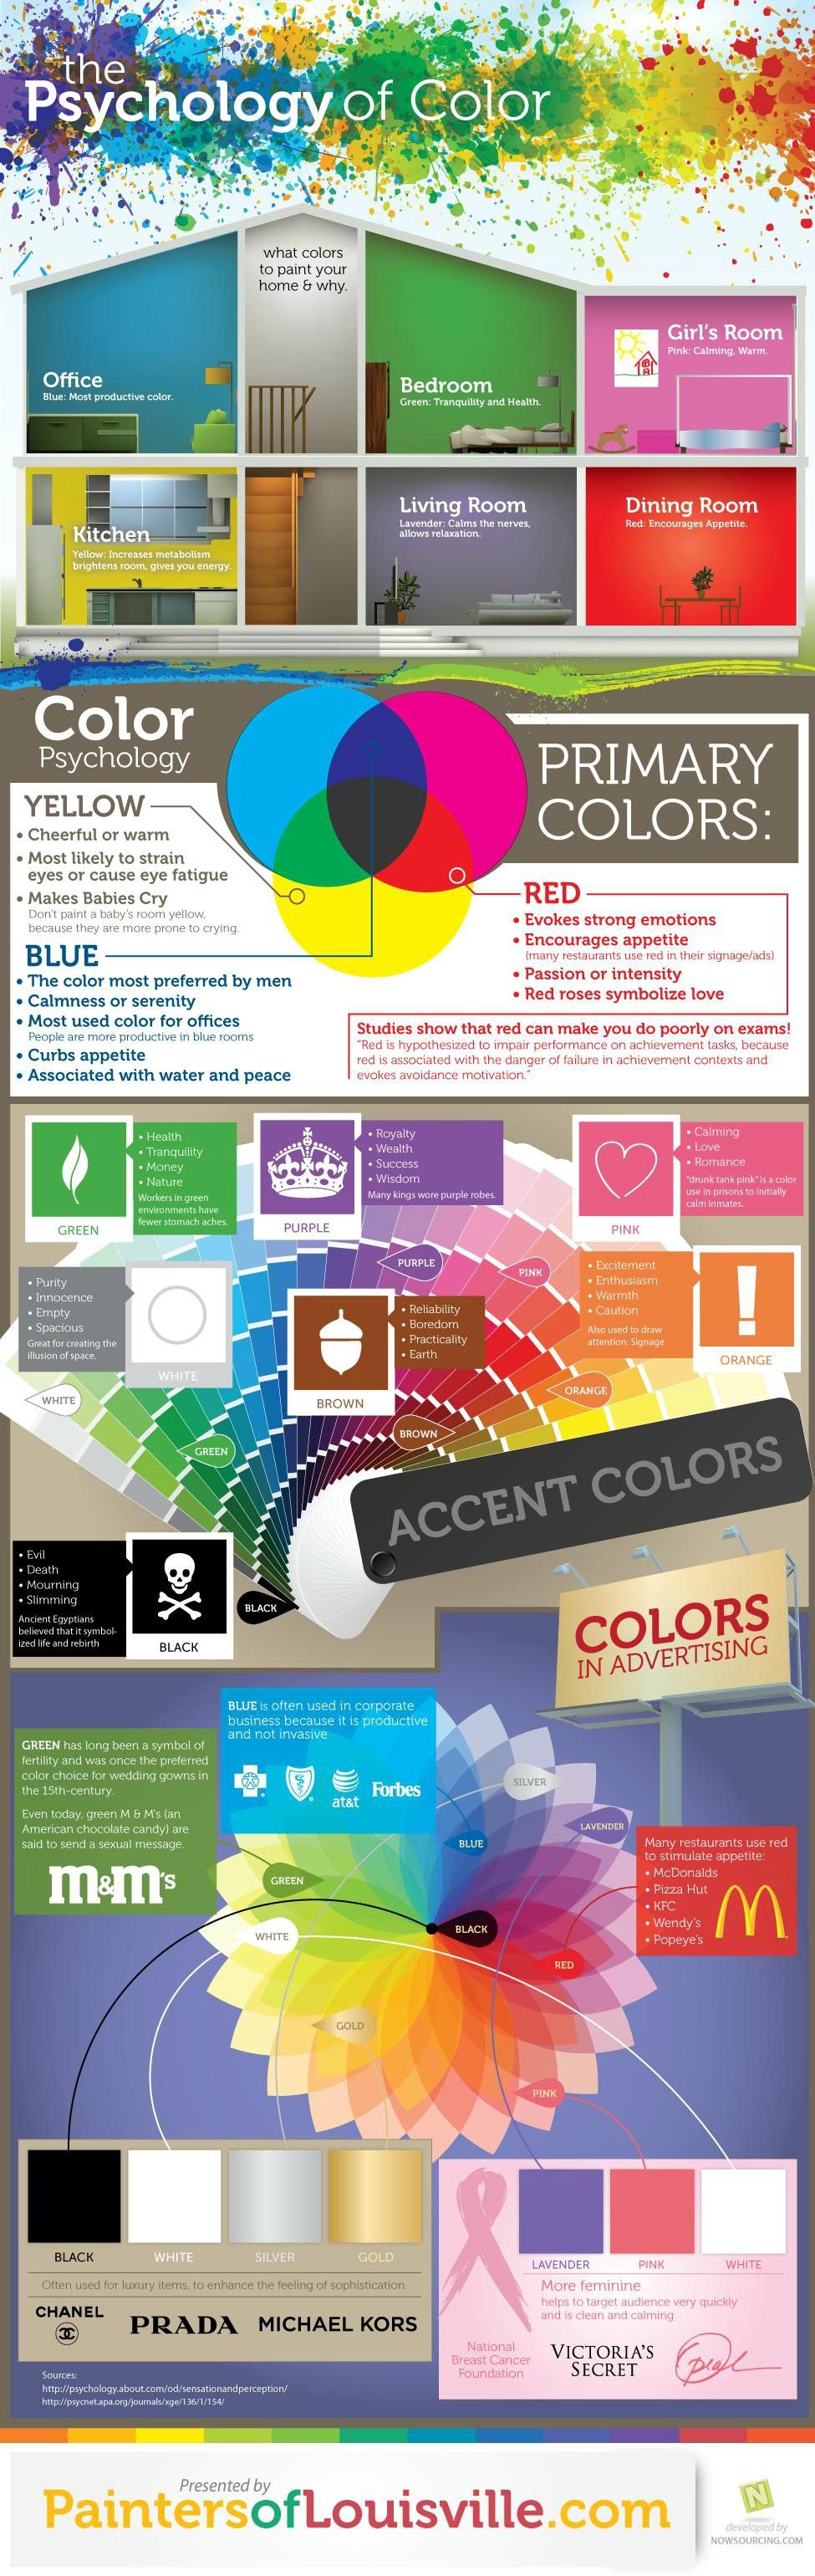 The Psychology of Color.